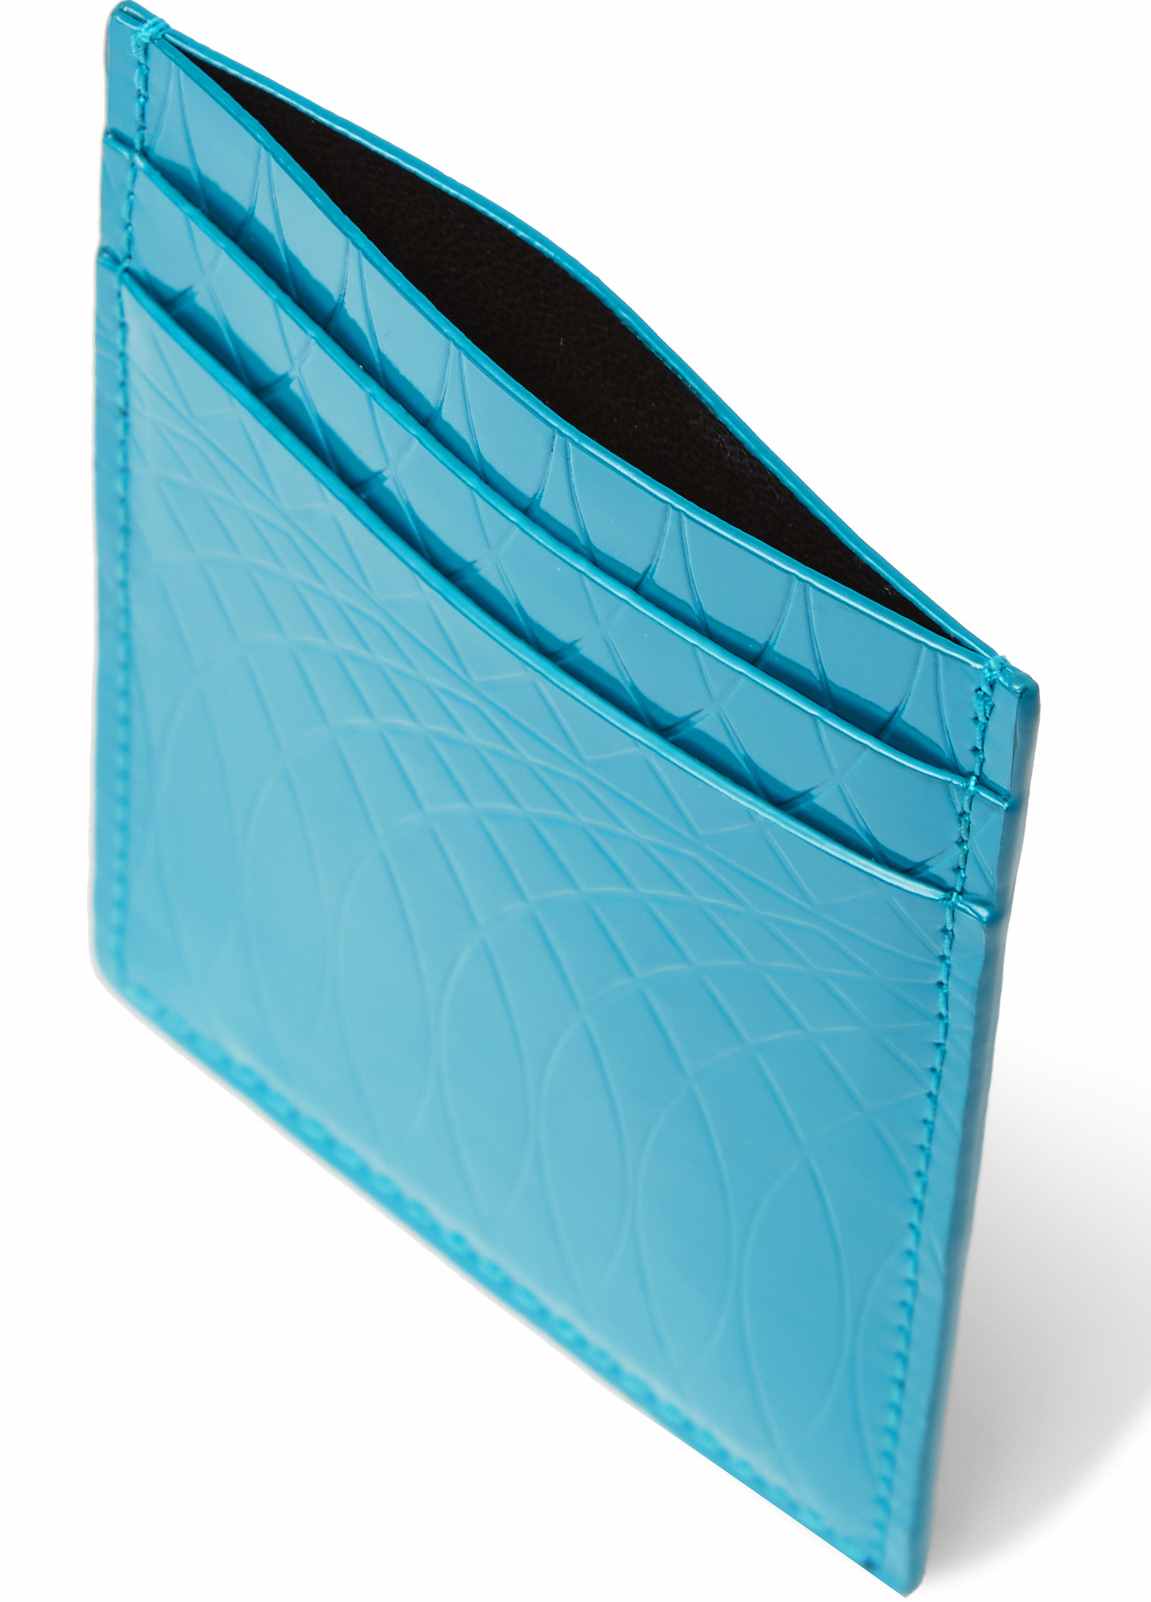 Paul Smith No. 9 Embossed Polished-Leather Cardholder